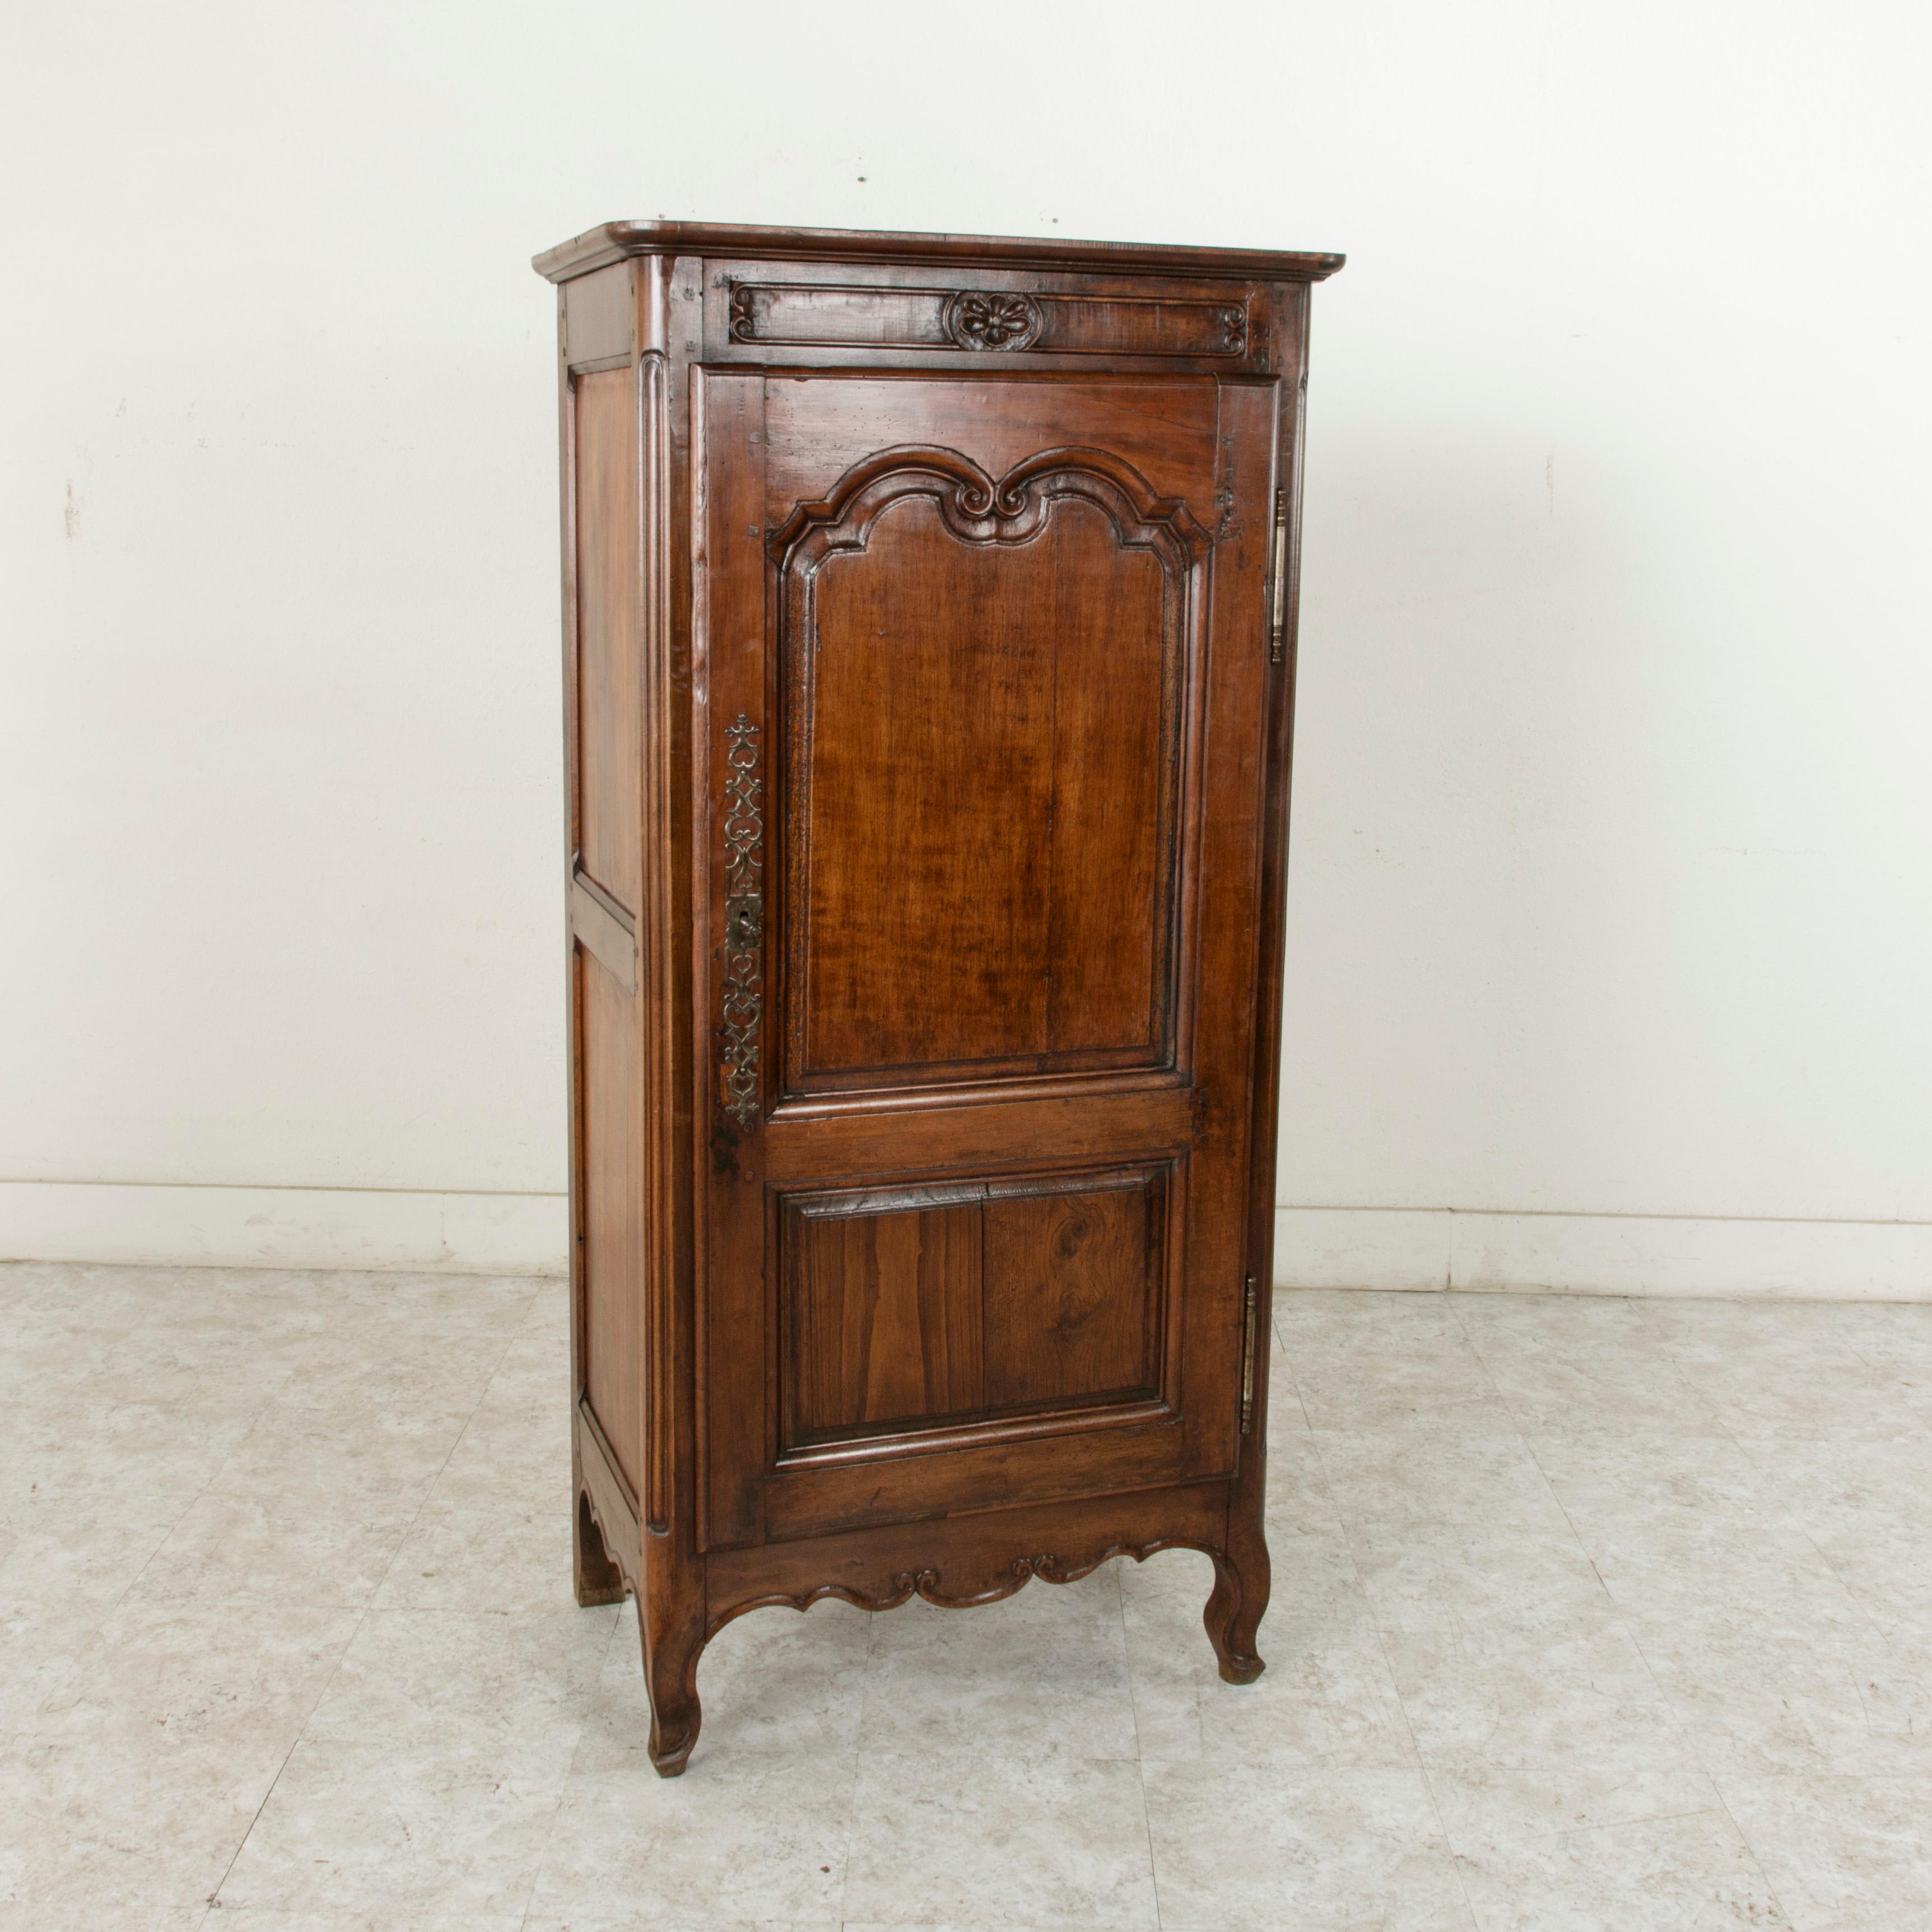 This small scale late 19th century French Louis XV style bonnetiere or cabinet is constructed of solid walnut with hand pegged paneled sides and hand carved scrolling details. A central deep relief hand carved flower adorns the top below the